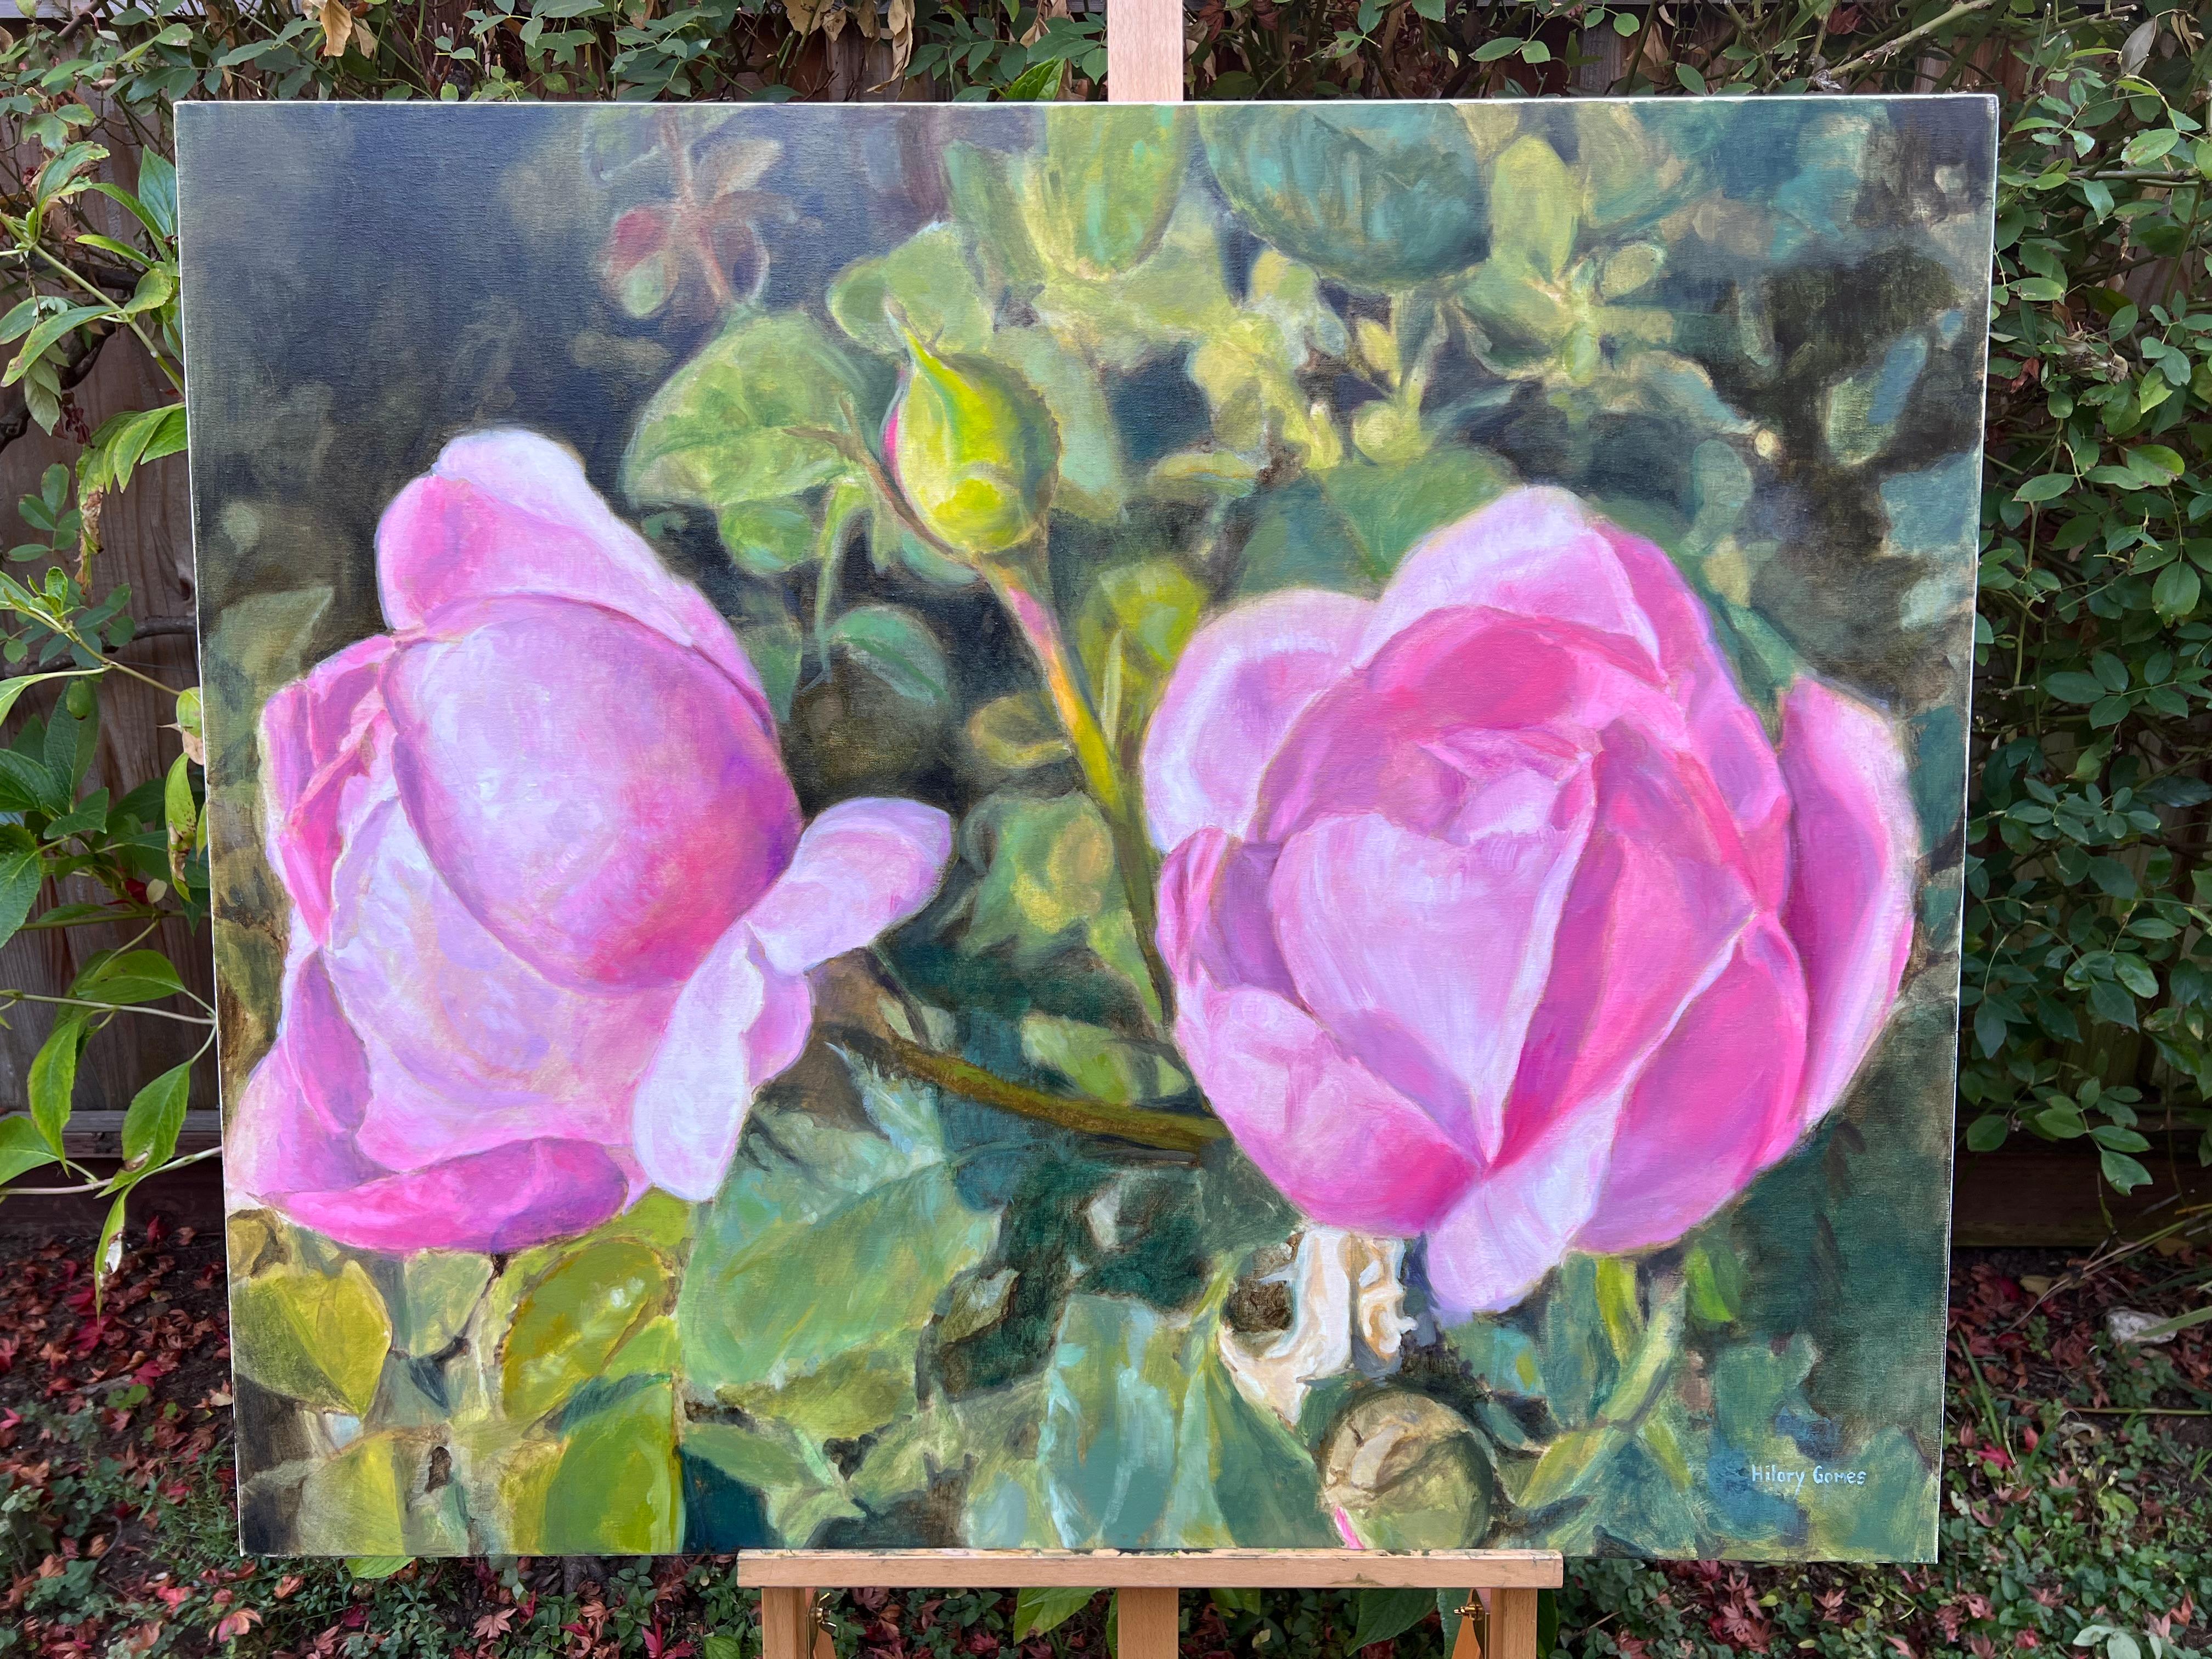 <p>Artist Comments<br>Two dainty roses blossom next to each other while a little bud eagerly awaits to join them. The sun casts a warm glow onto the pink petals and green leaves, creating a delicate shadow that highlights their details. Artist